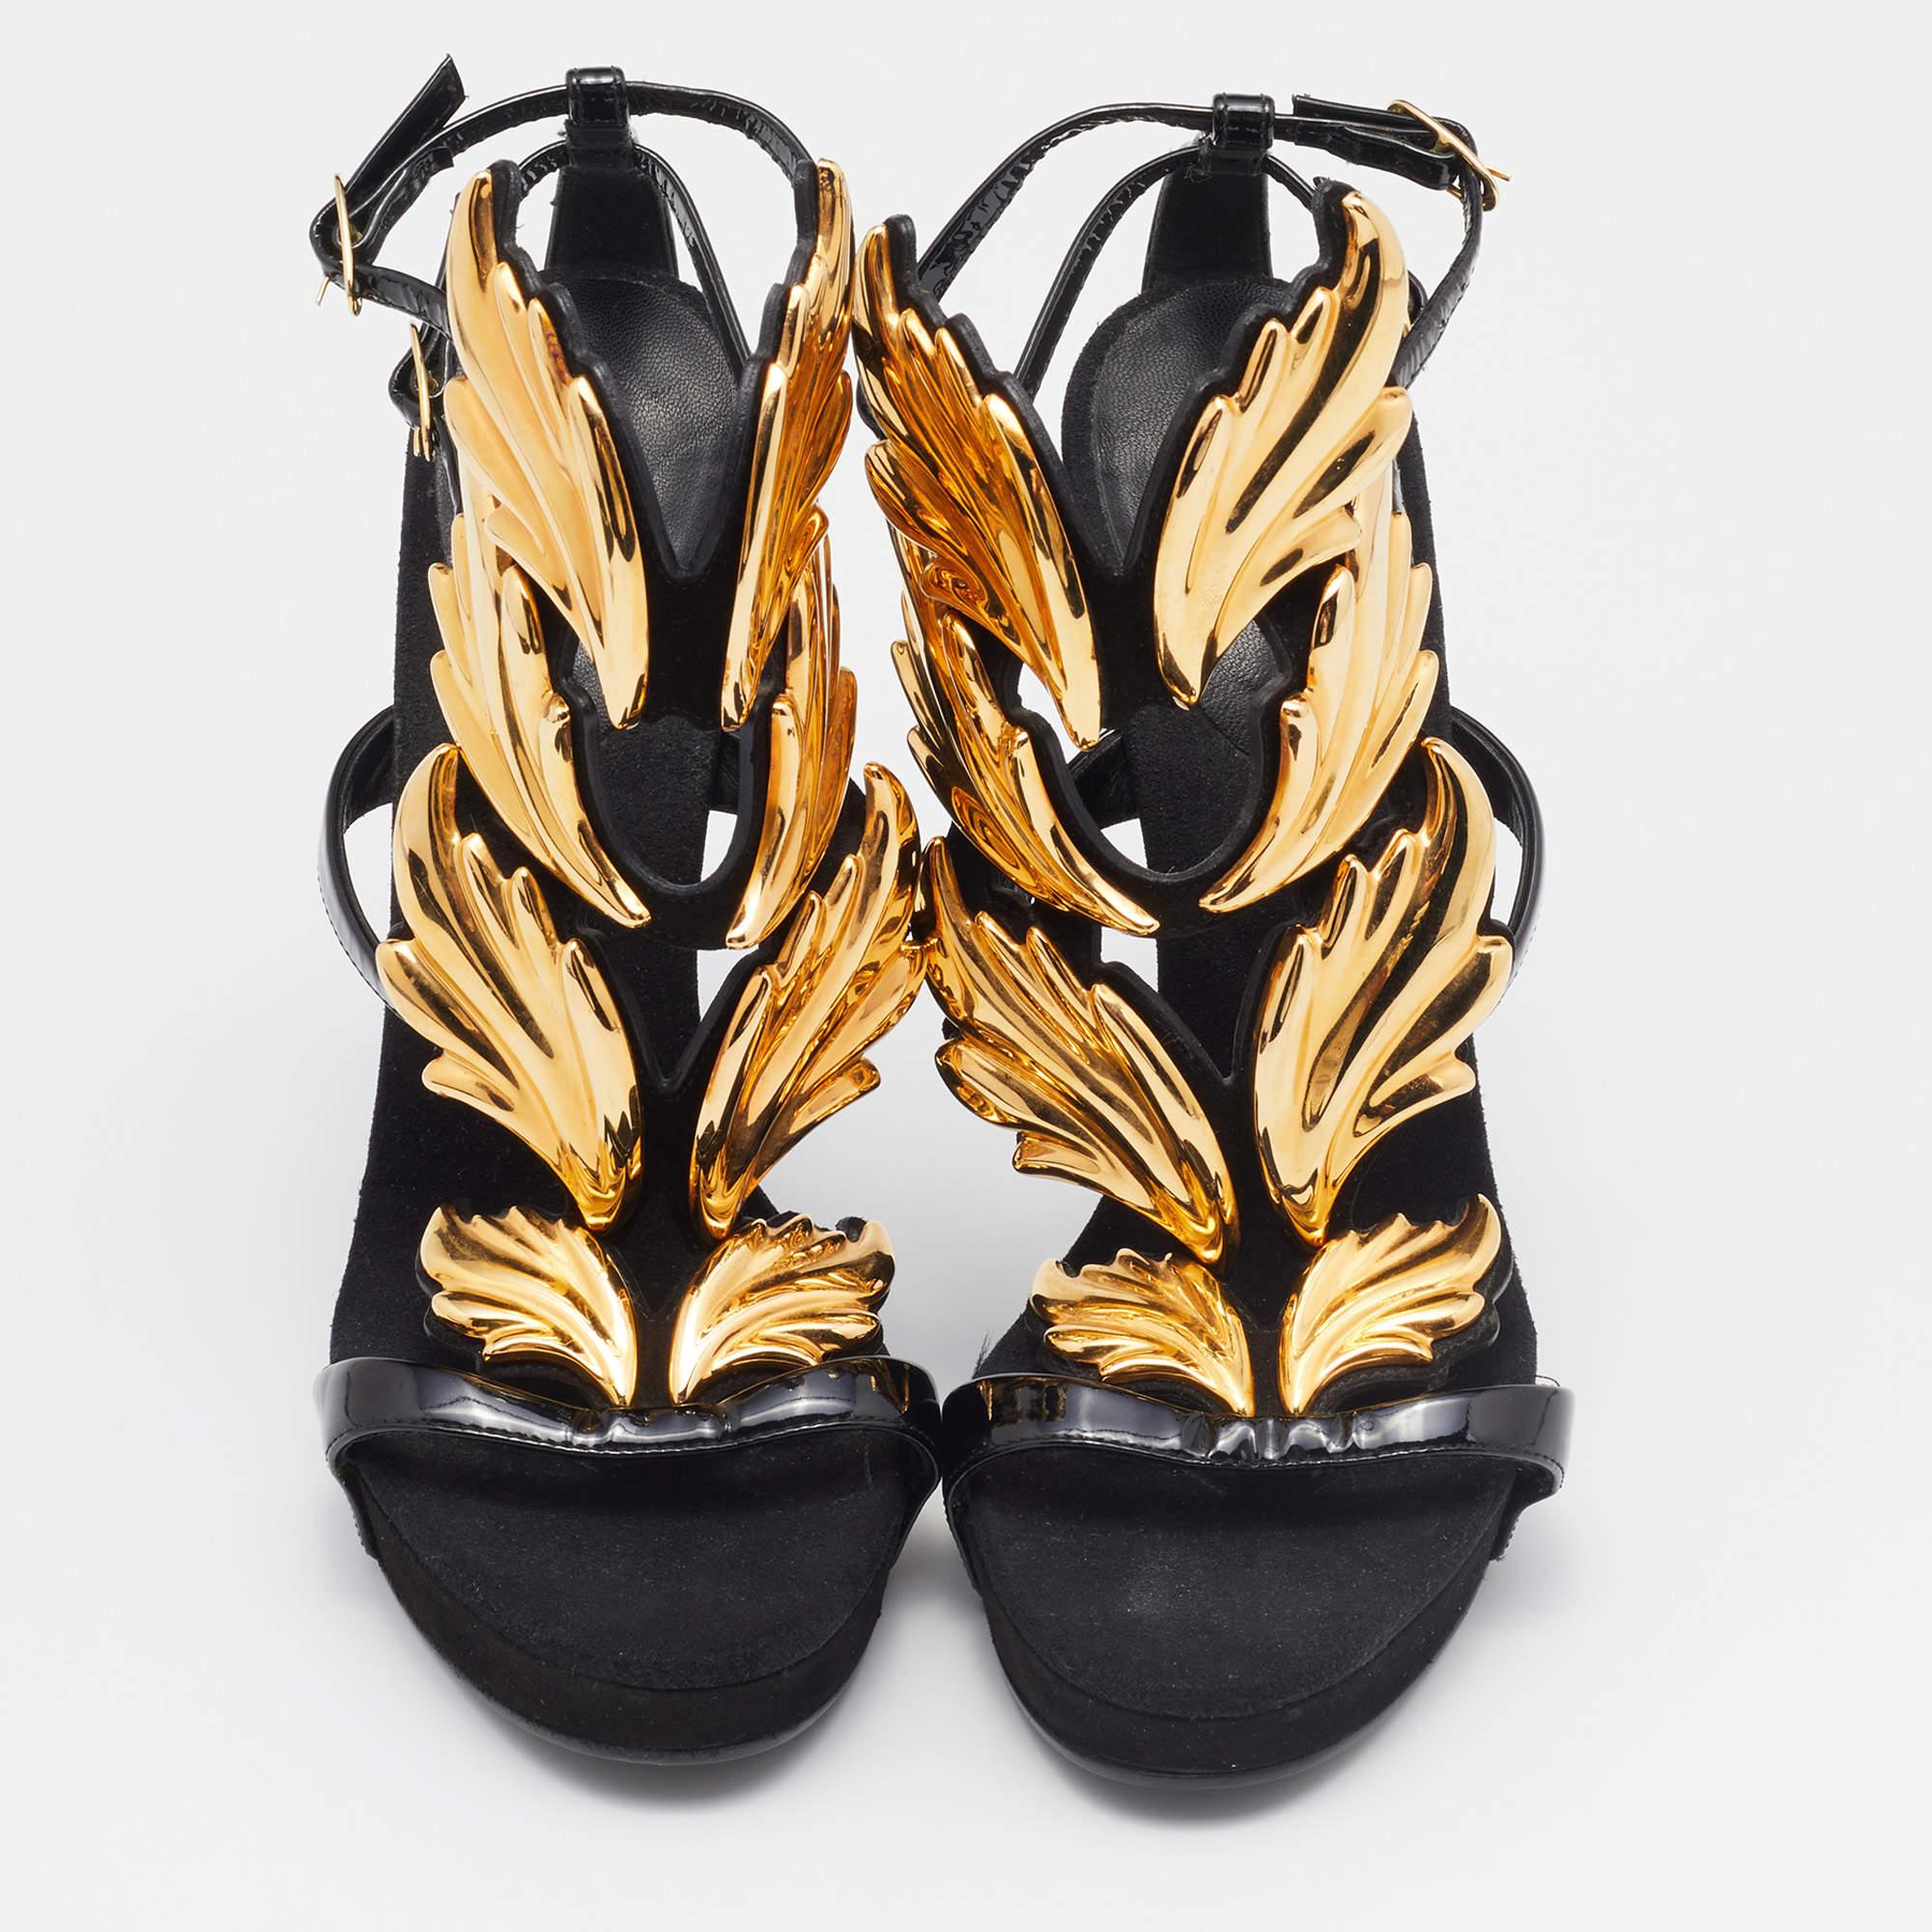 These exquisite sandals feature a striking blend of patent leather and gold accents paired with soft suede detailing. With their sleek design and luxurious materials, they are the perfect statement piece for any summer ensemble.

